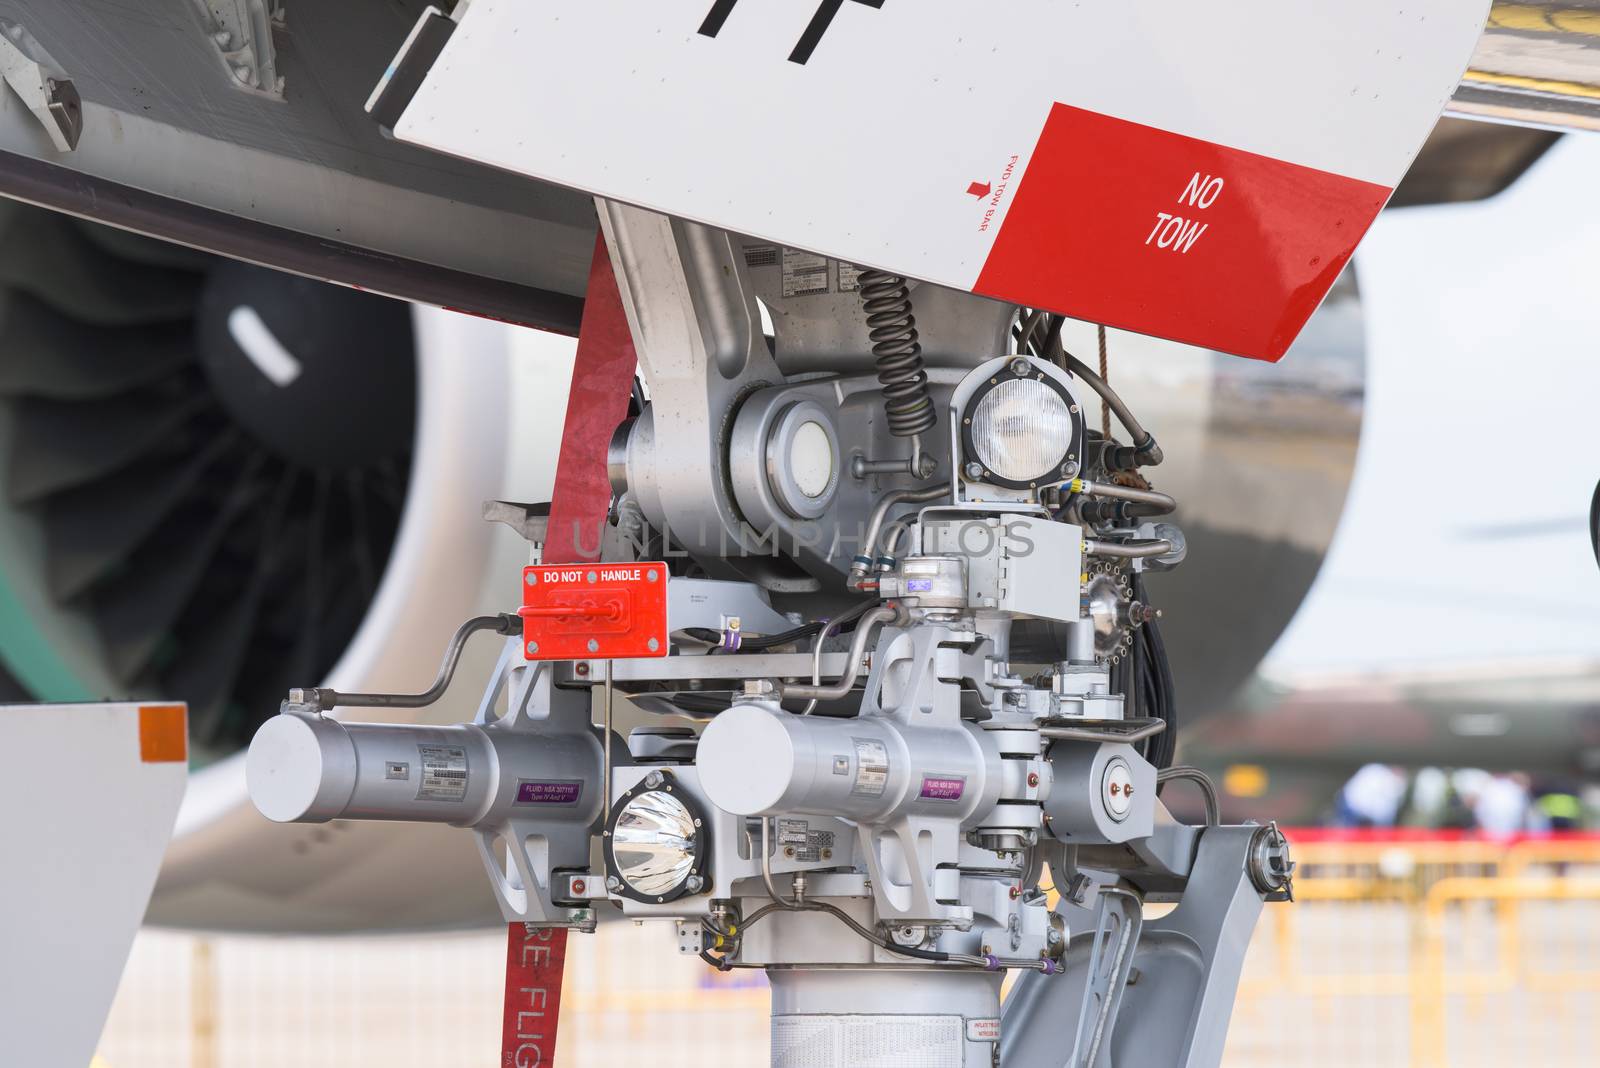 Singapore - February 16, 2016: Detail of the nose landing gear of an Airbus A380 at Singapore Airshow at Changi Exhibition Centre in Singapore.